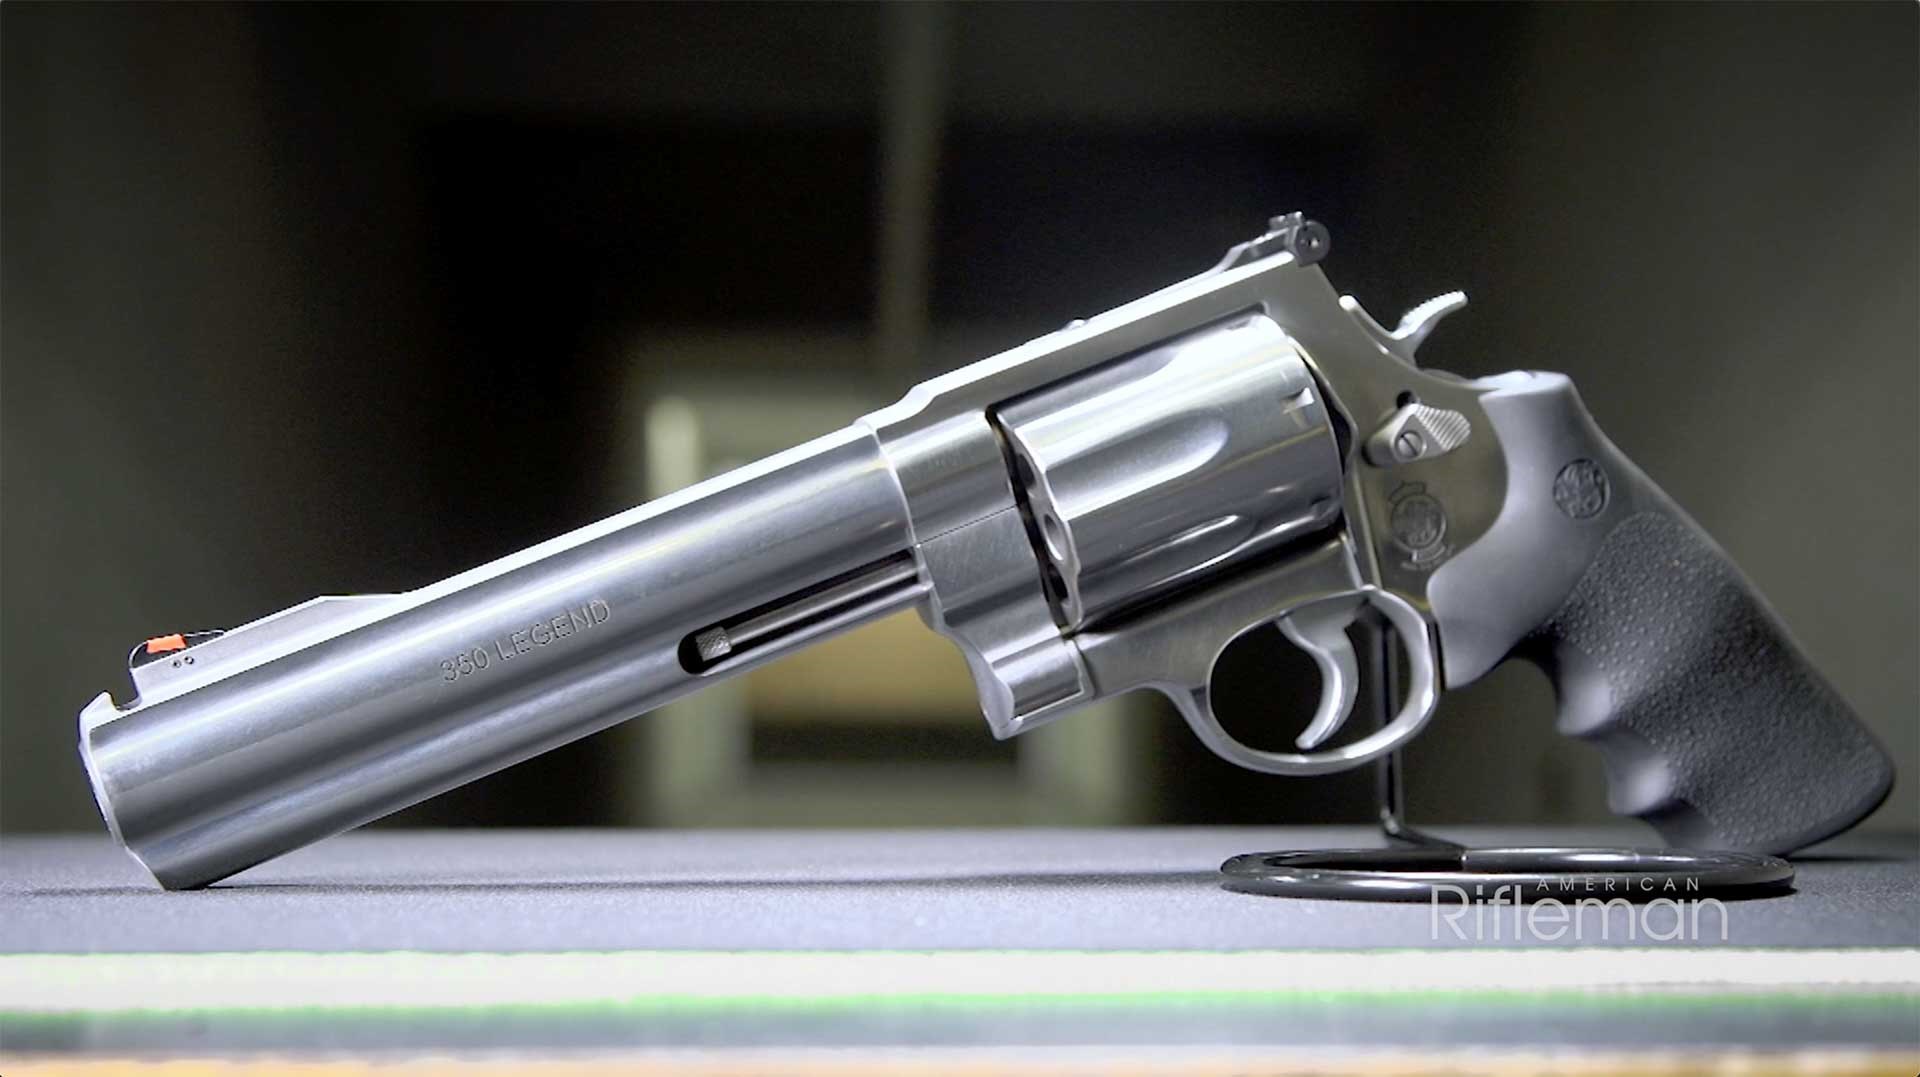 Left side of the Smith & Wesson Model 350 revolver.